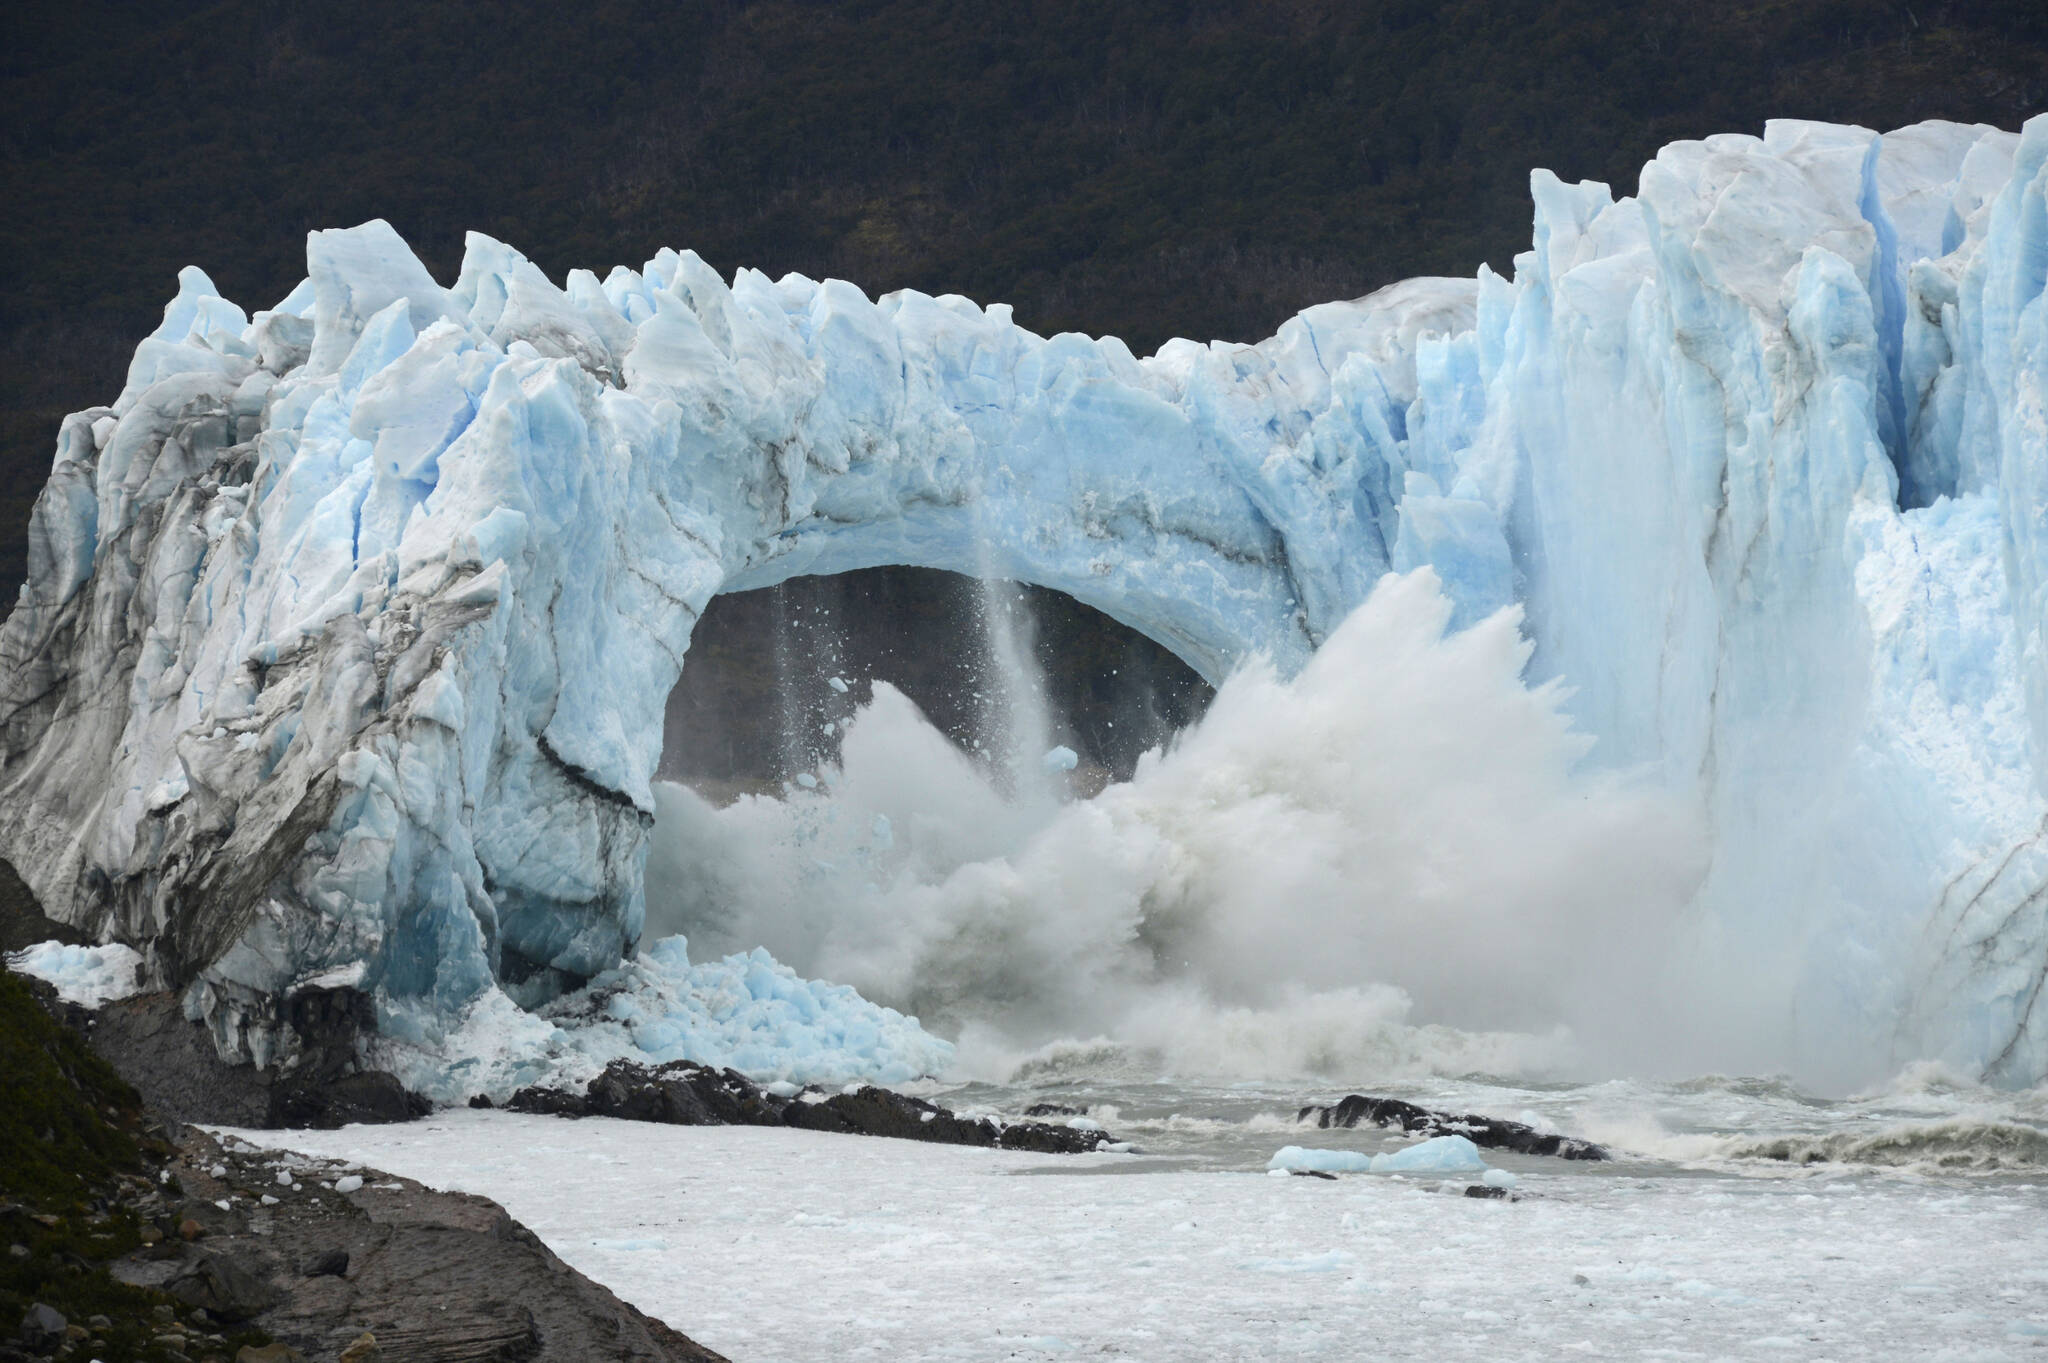 Chunks of ice break off the Perito Moreno Glacier, in Lake Argentina, at Los Glaciares National Park, near El Calafate, in Argentina's Patagonia region, March 10, 2016. As glaciers melt and pour massive amounts of water into nearby lakes, 15 million people across the globe live under the threat of a sudden and deadly outburst flood, a new study finds. (AP Photo / Francisco Munoz)